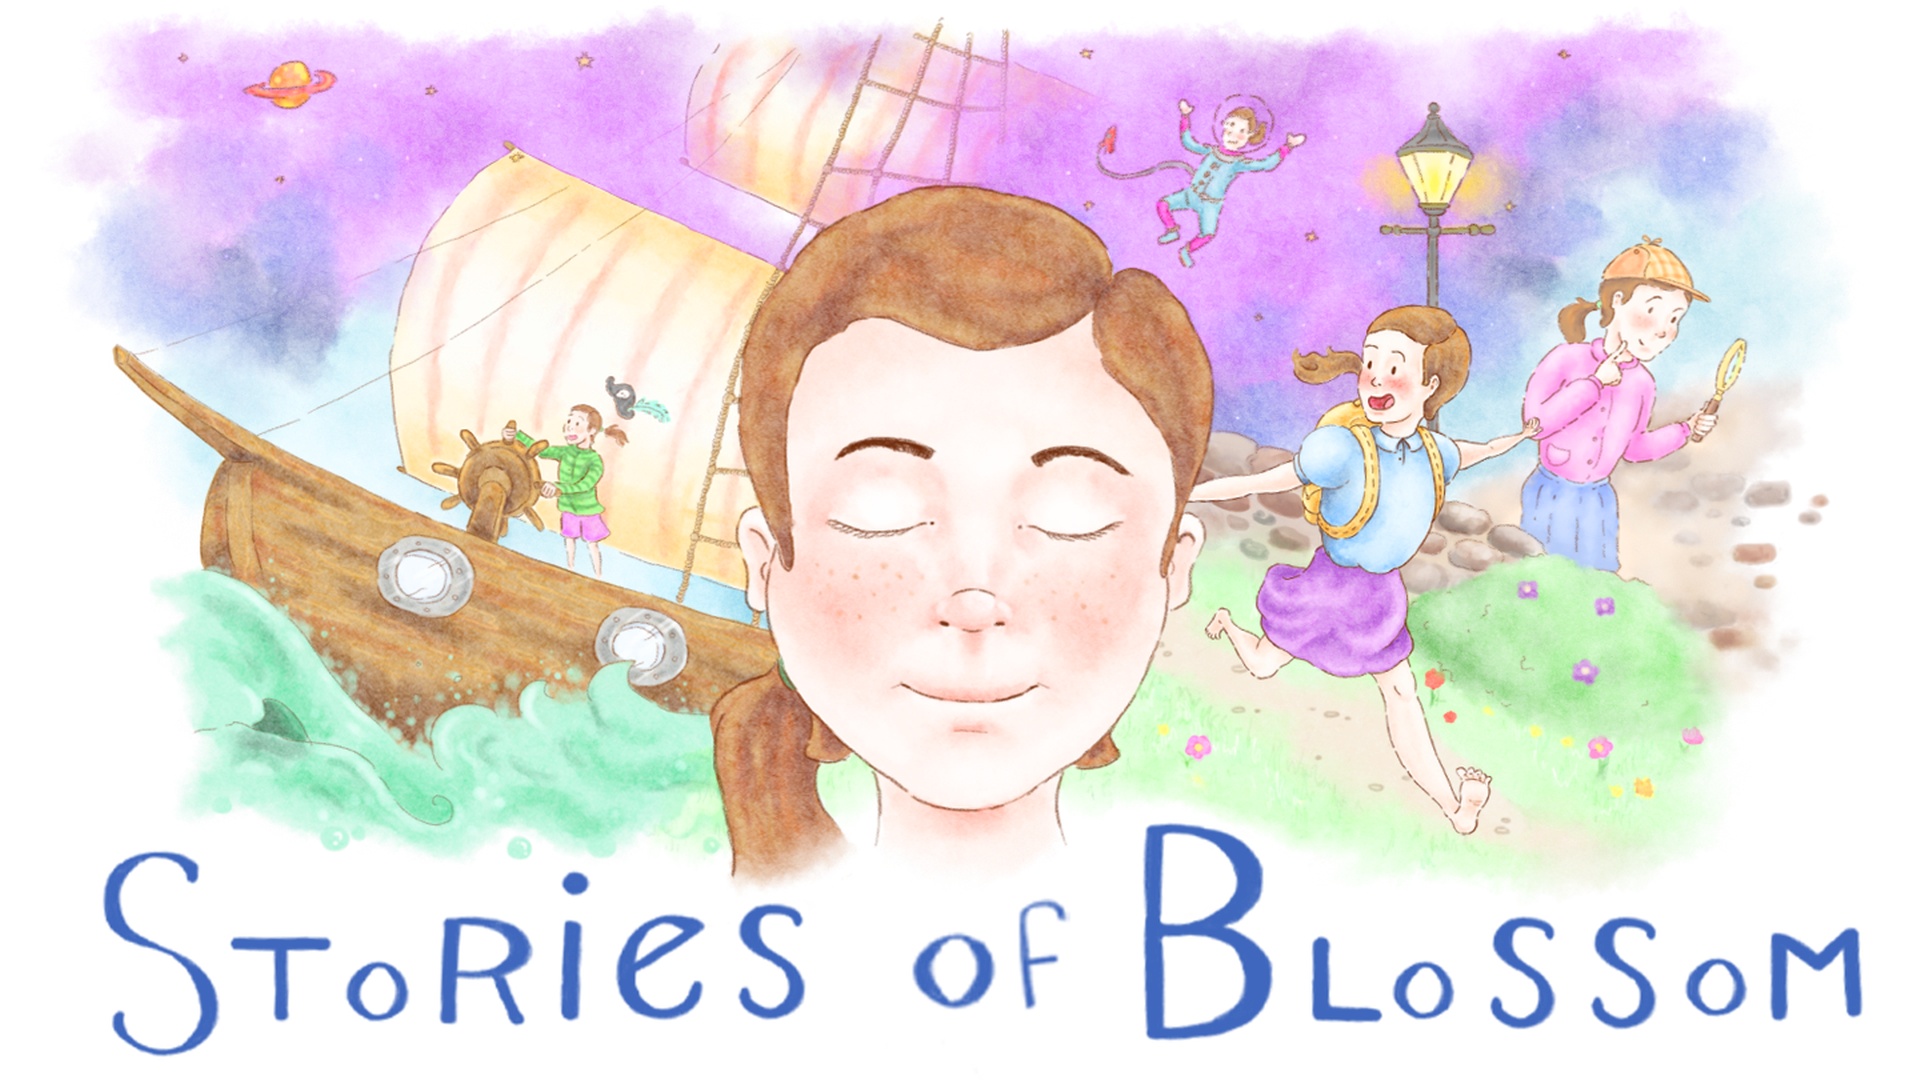 A storybook-drawn photo of Stories of Blossom’s title is shown, which depicts a girl with her eyes closed, imagining different stories in her head, including one of her on a pirate ship, one of her running down a hill, one of her floating in the sky, and another of her holding what appears to be a mirror.